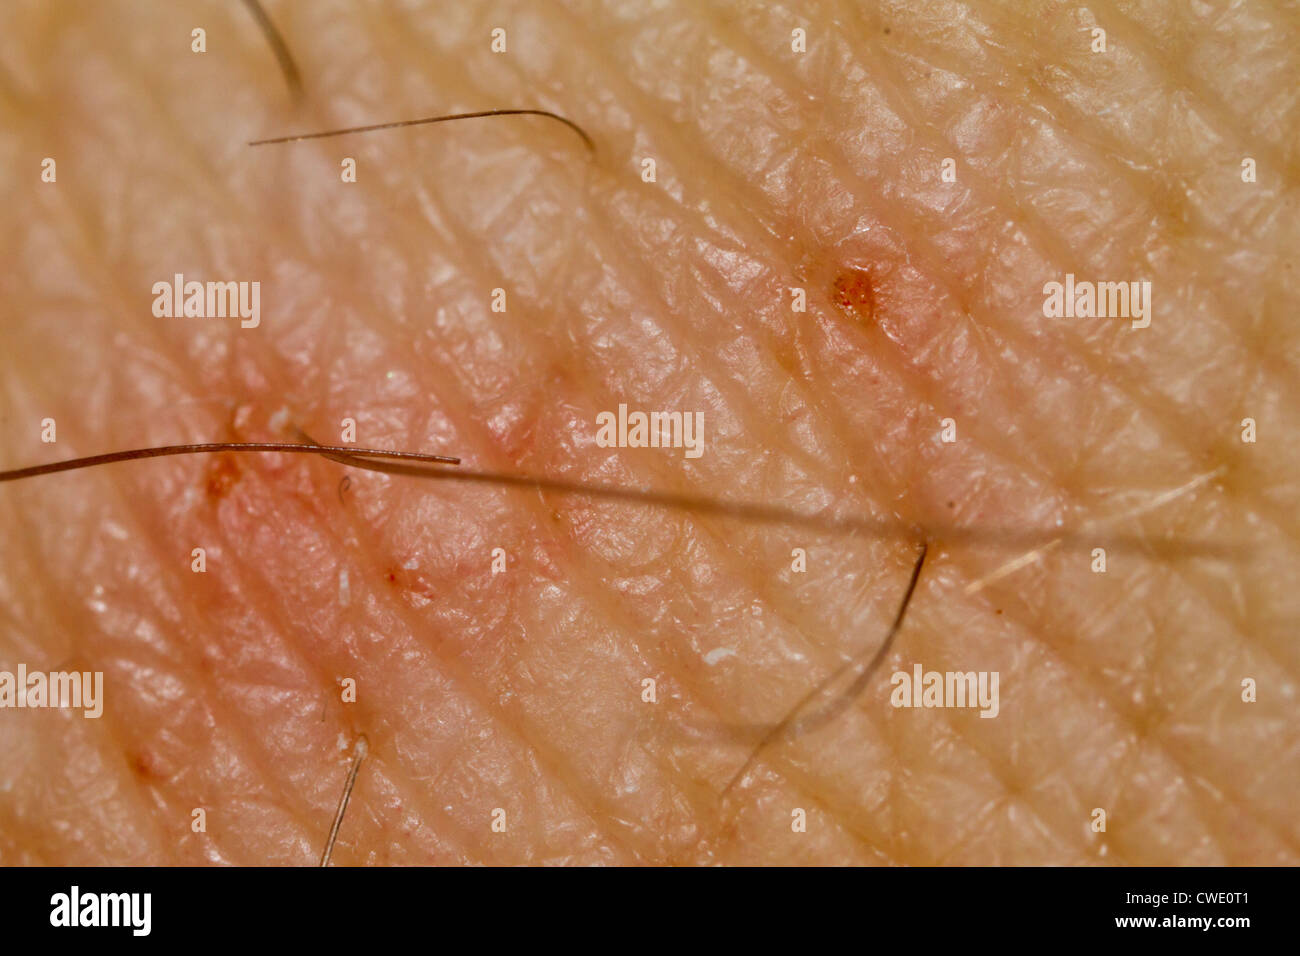 Scabies infected skin, close-up. Stock Photo